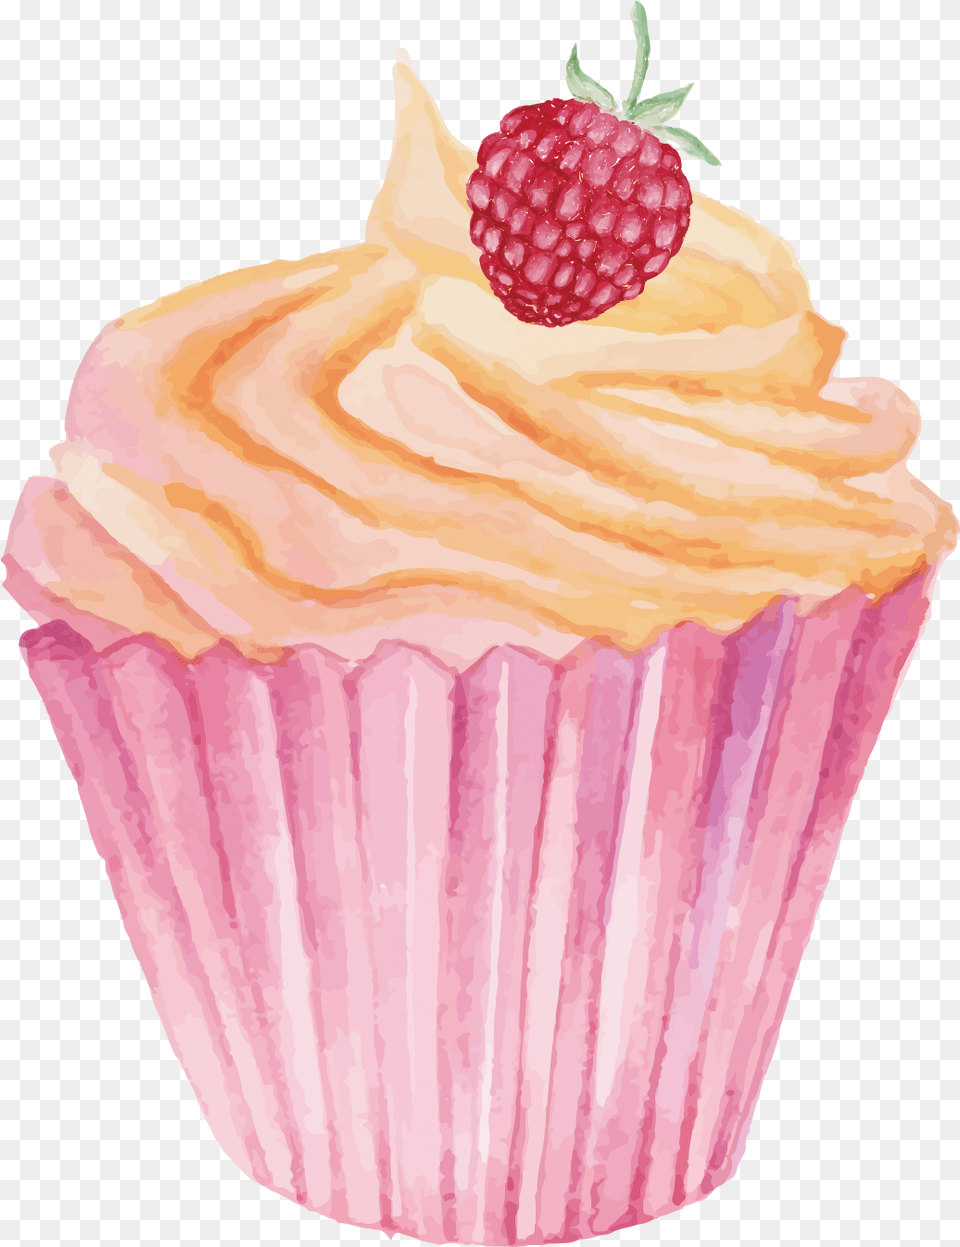 Happy Birthday To You Greeting Card Postcard Watercolor Cupcake Vector, Food, Cake, Cream, Dessert Png